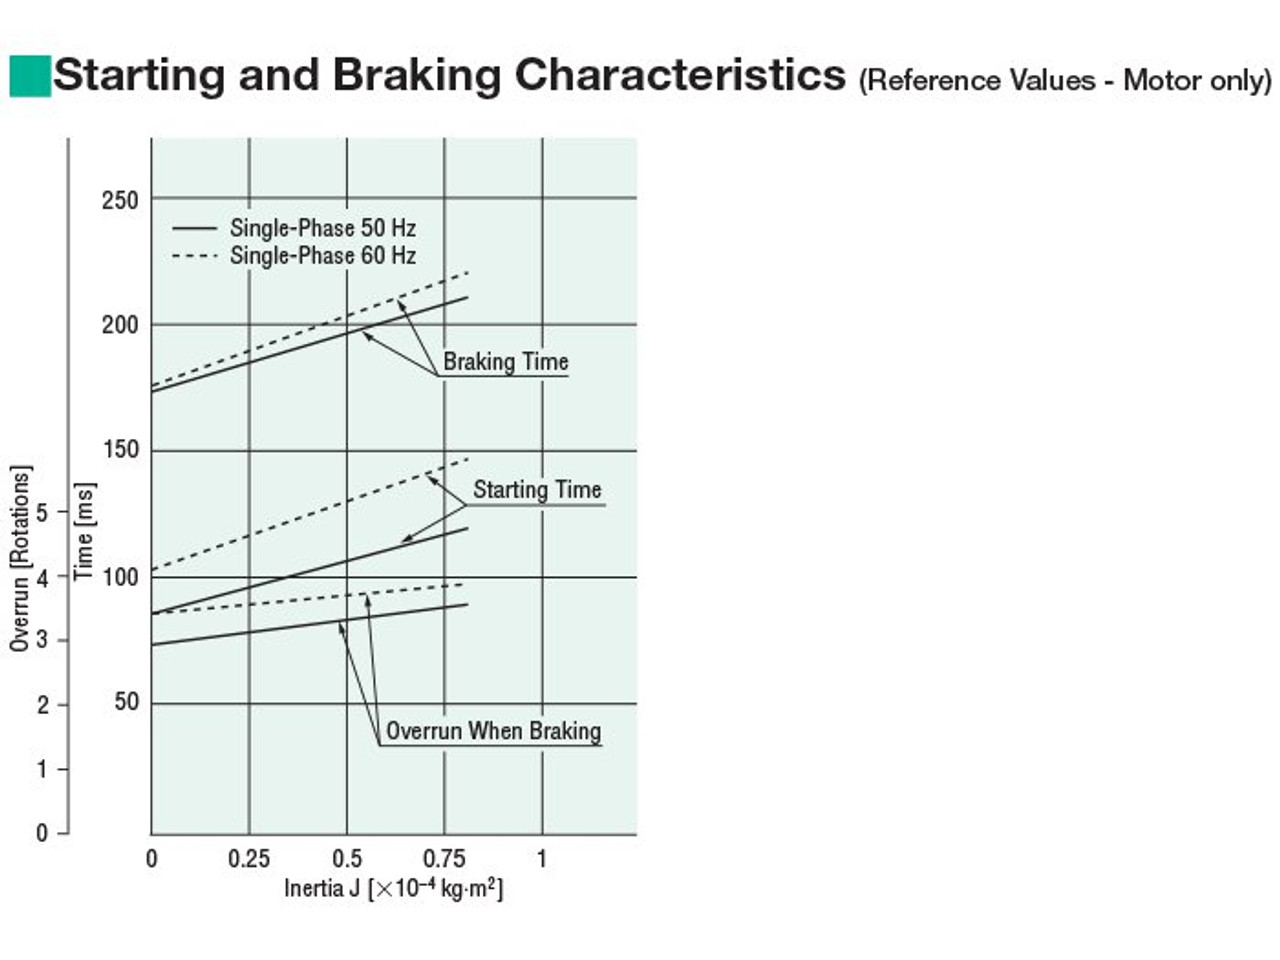 5RK40UCM-7.5A - Brake Specifications